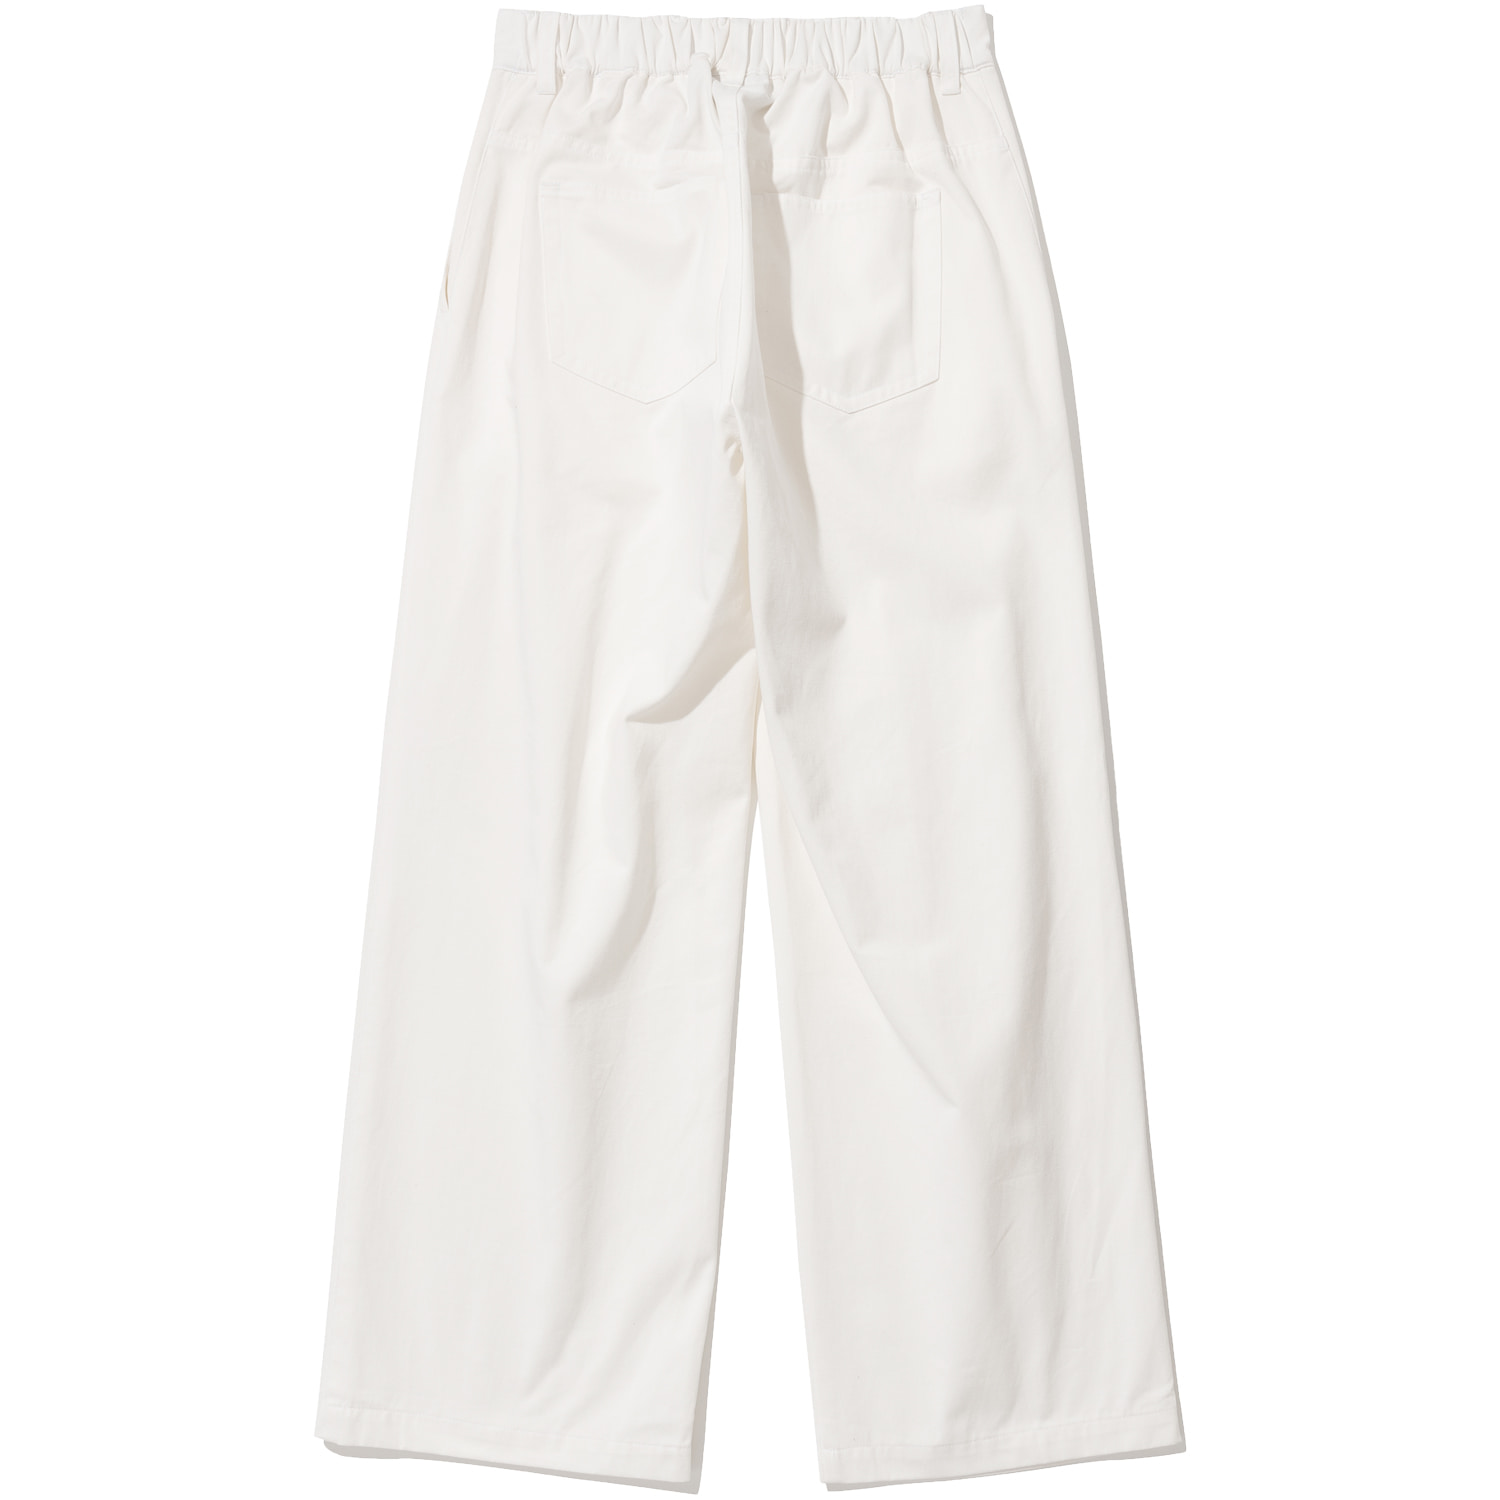 Two Tuck Wide Cotton Pants - Ivory,NOT4NERD